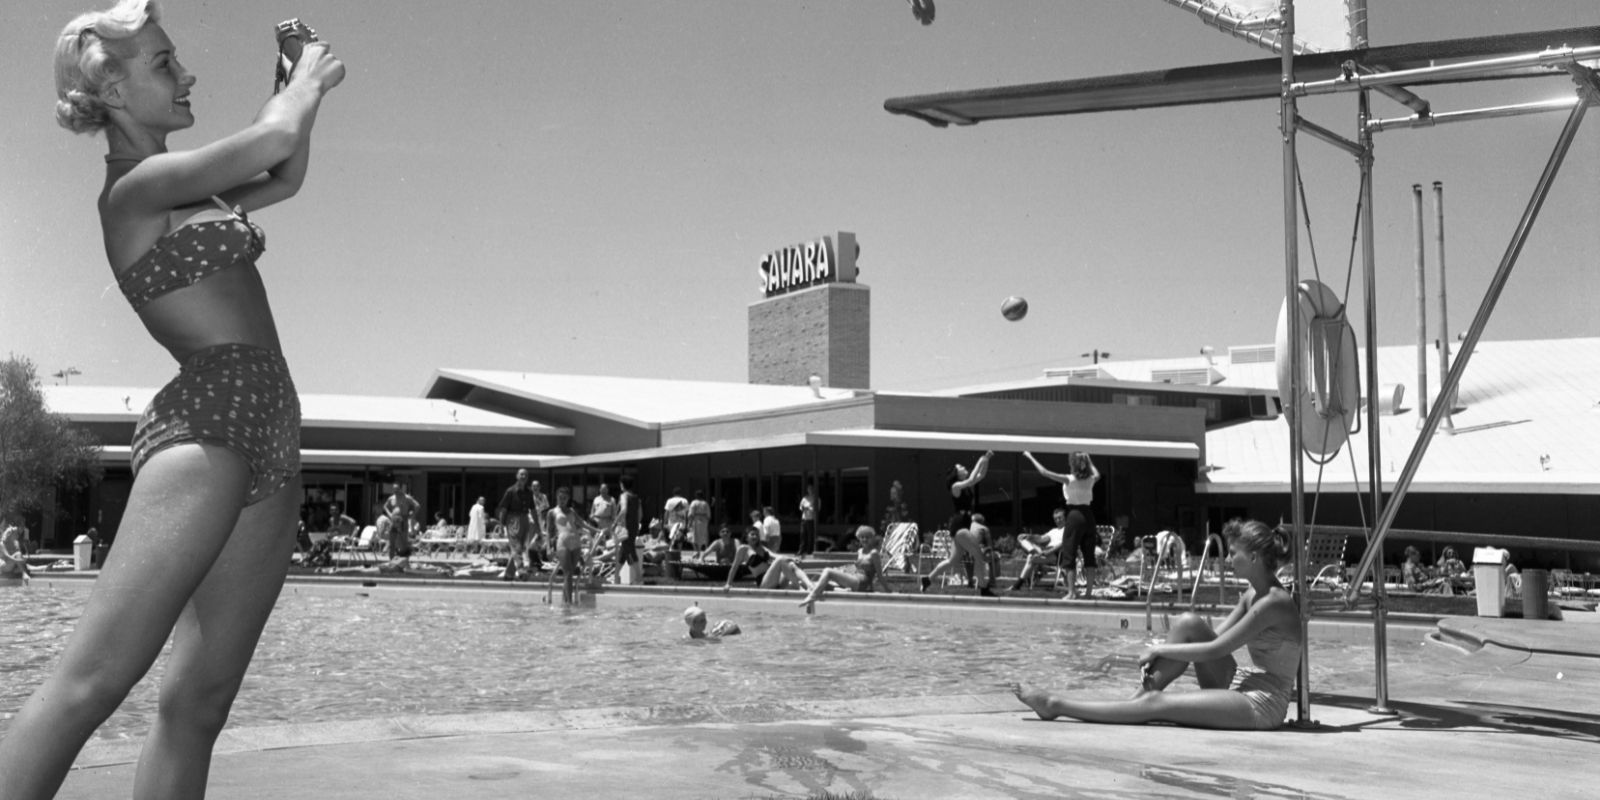 Vintage SAHARA Las Vegas image of people at the resort pool. The image is in black and white